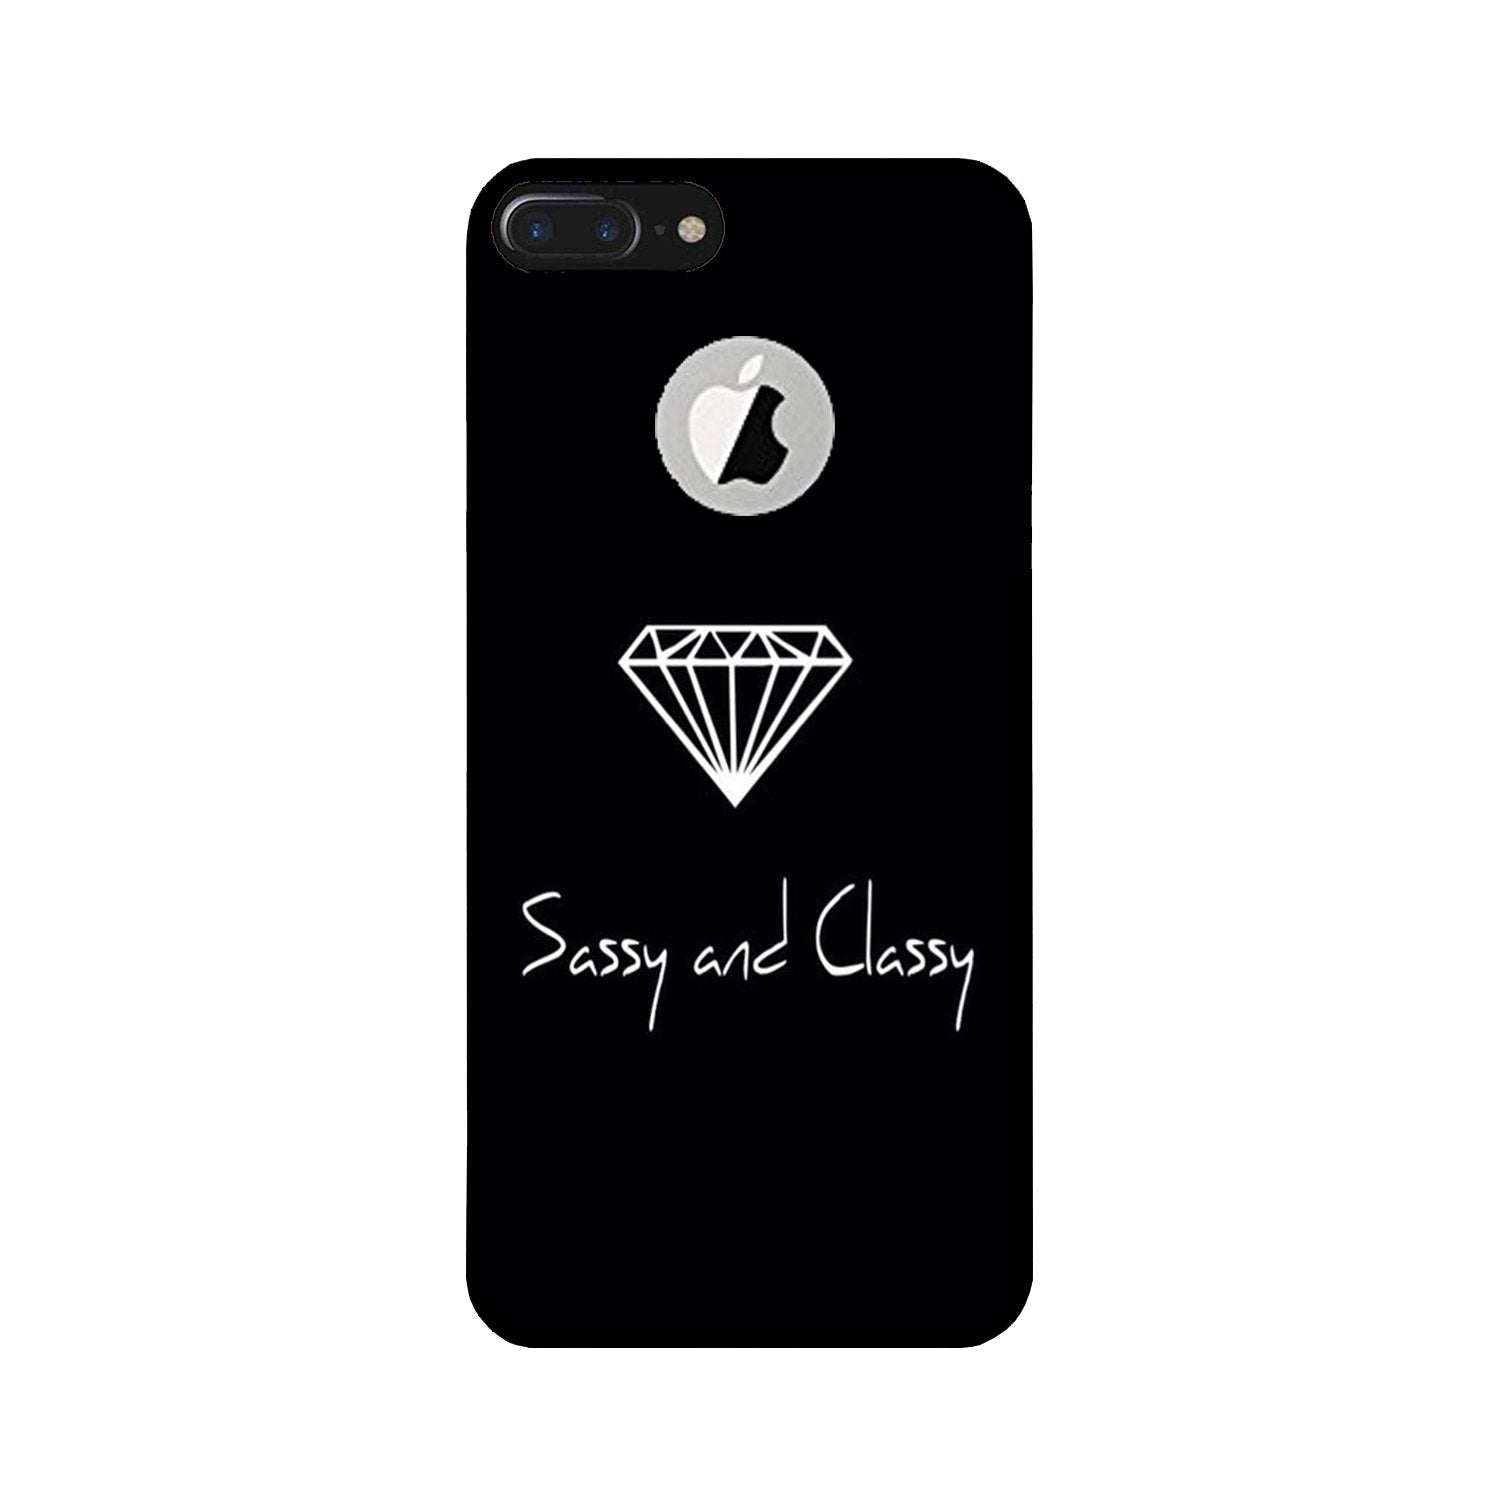 Sassy and Classy Case for iPhone 7 Plus logo cut (Design No. 264)